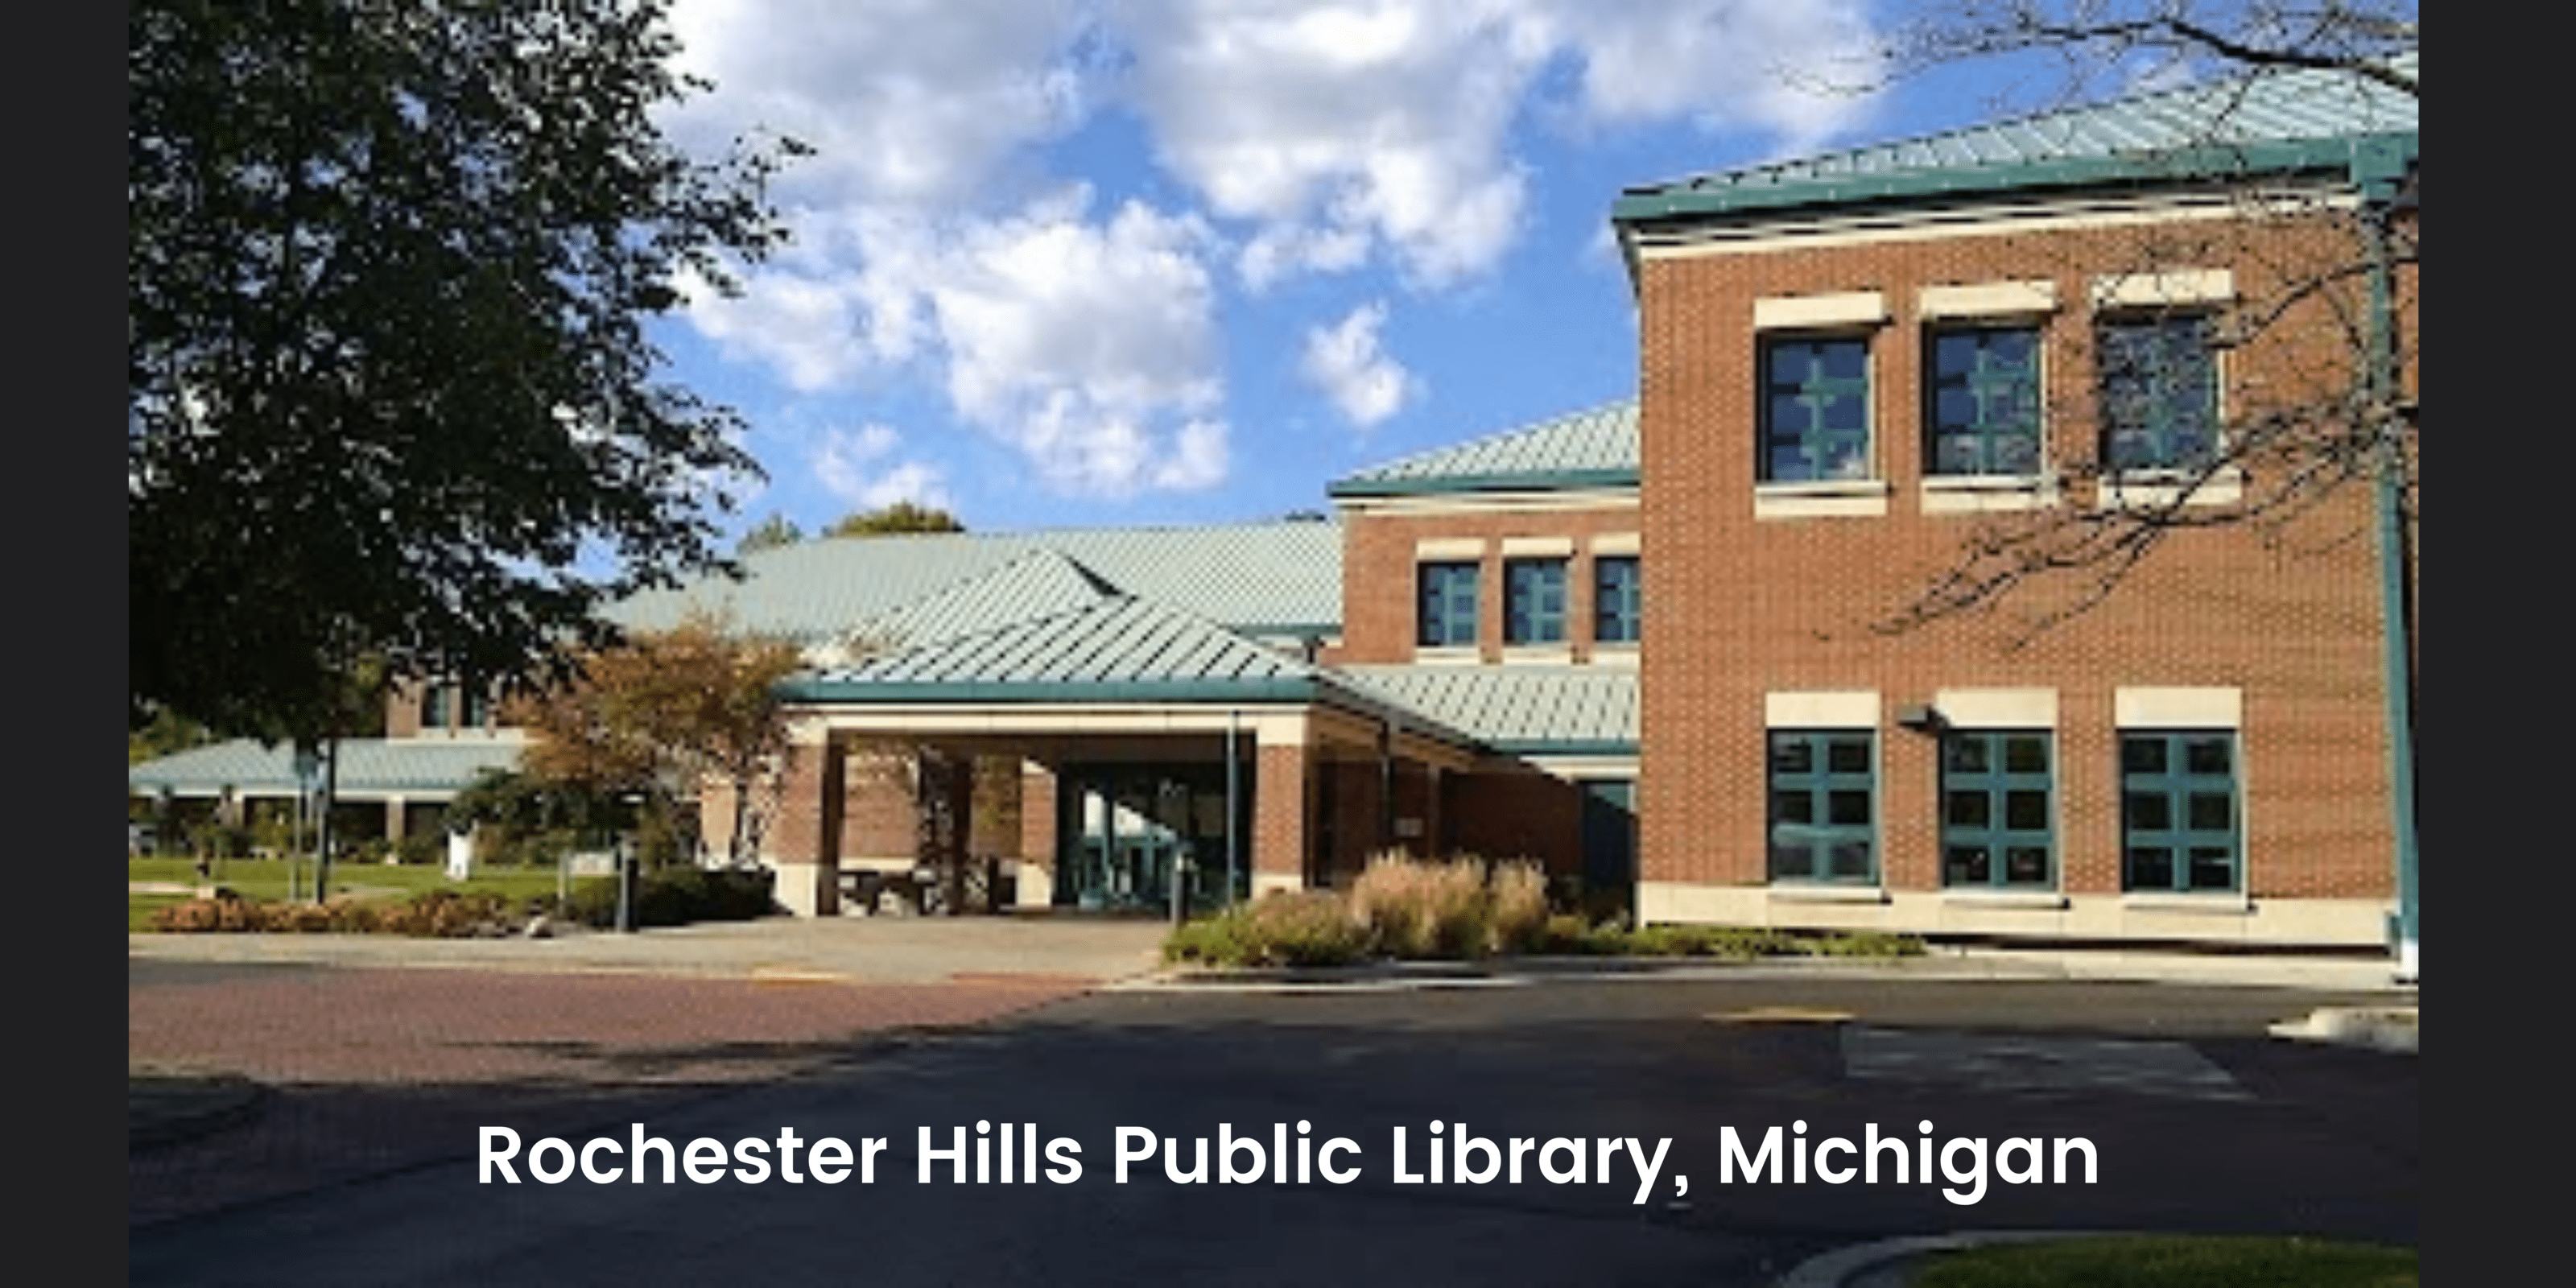 image of rochester hills public library